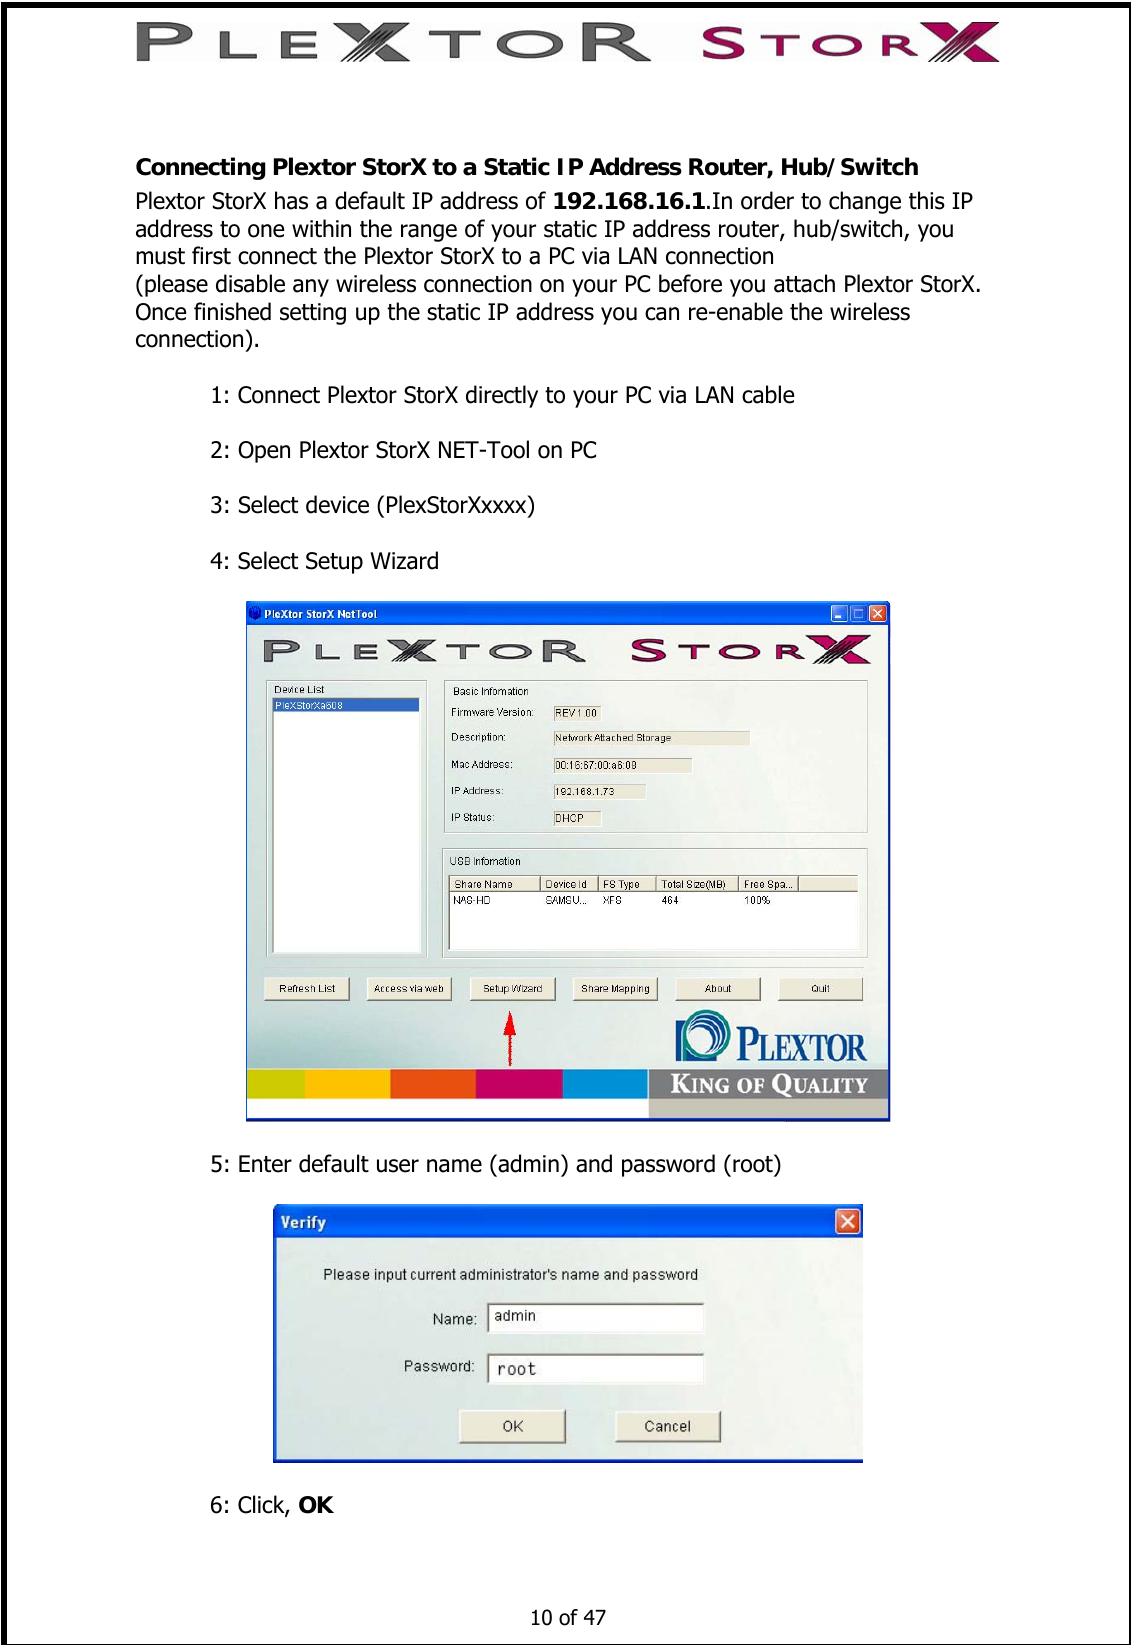   Connecting Plextor StorX to a Static IP Address Router, Hub/Switch Plextor StorX has a default IP address of 192.168.16.1.In order to change this IP address to one within the range of your static IP address router, hub/switch, you must first connect the Plextor StorX to a PC via LAN connection (please disable any wireless connection on your PC before you attach Plextor StorX. Once finished setting up the static IP address you can re-enable the wireless connection).   1: Connect Plextor StorX directly to your PC via LAN cable    2: Open Plextor StorX NET-Tool on PC    3: Select device (PlexStorXxxxx)    4: Select Setup Wizard    5: Enter default user name (admin) and password (root)      10 of 47     6: Click, OK 